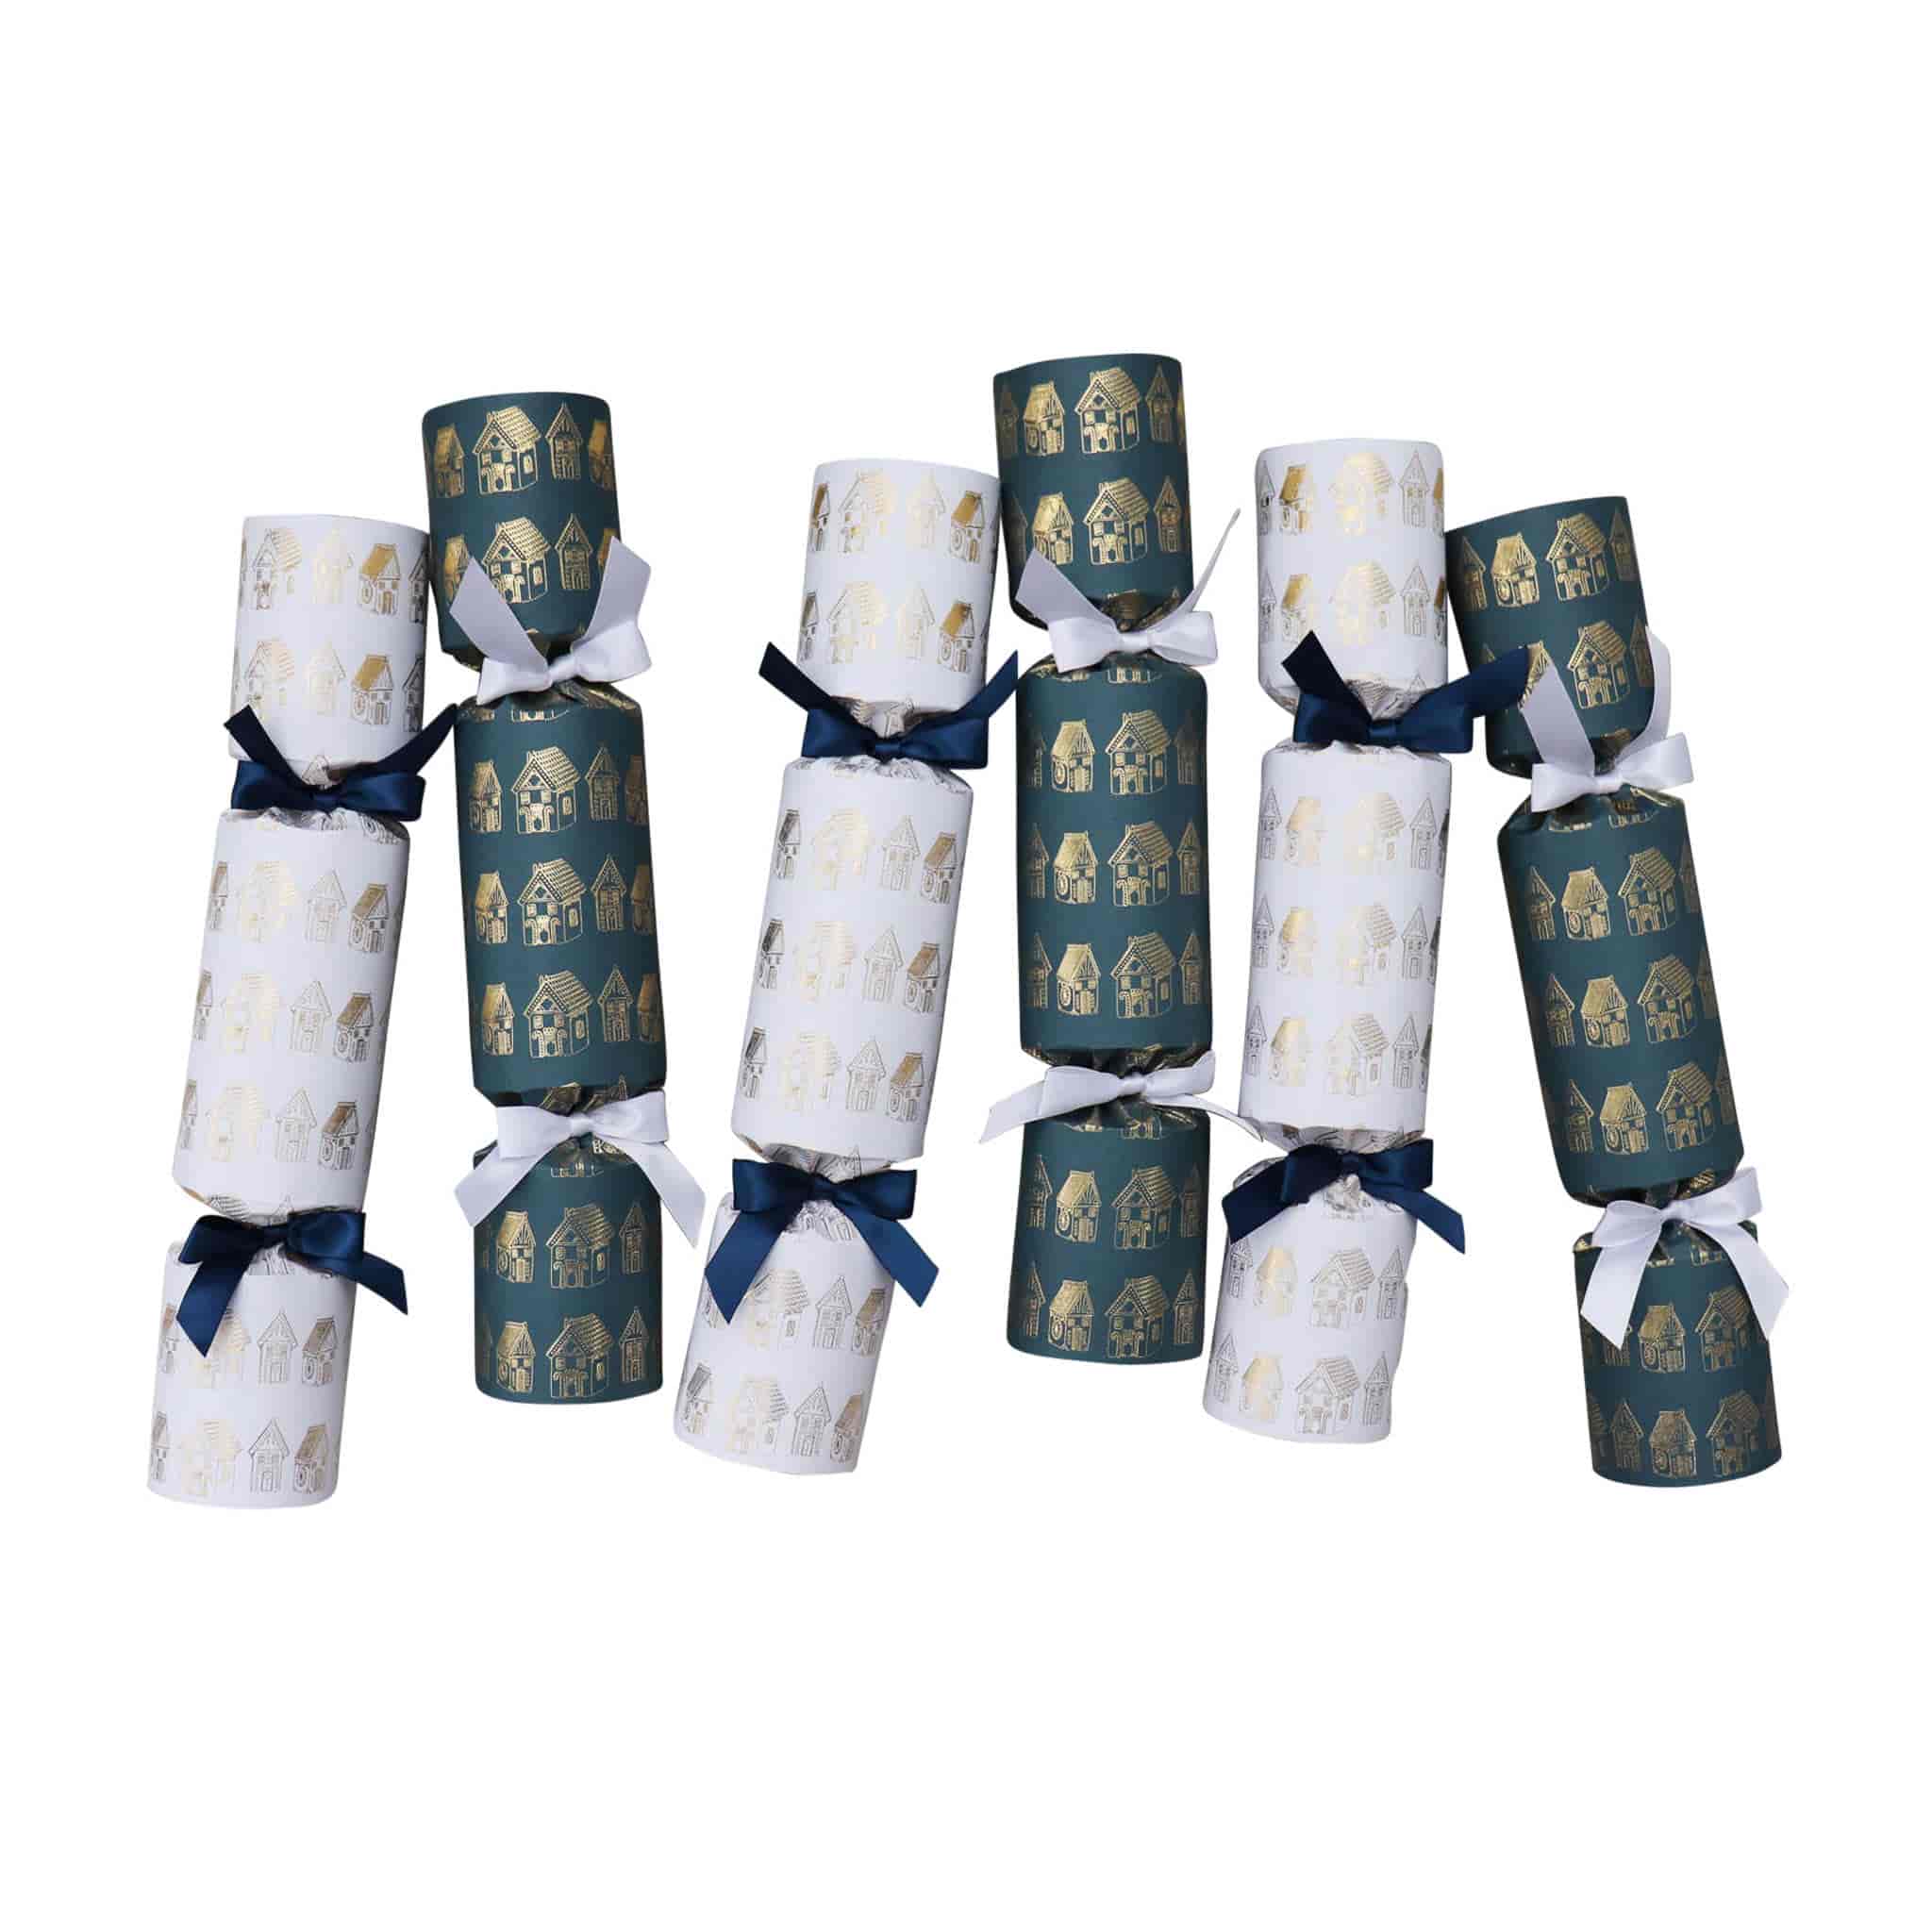 Luxury Gingerbread House Christmas Crackers